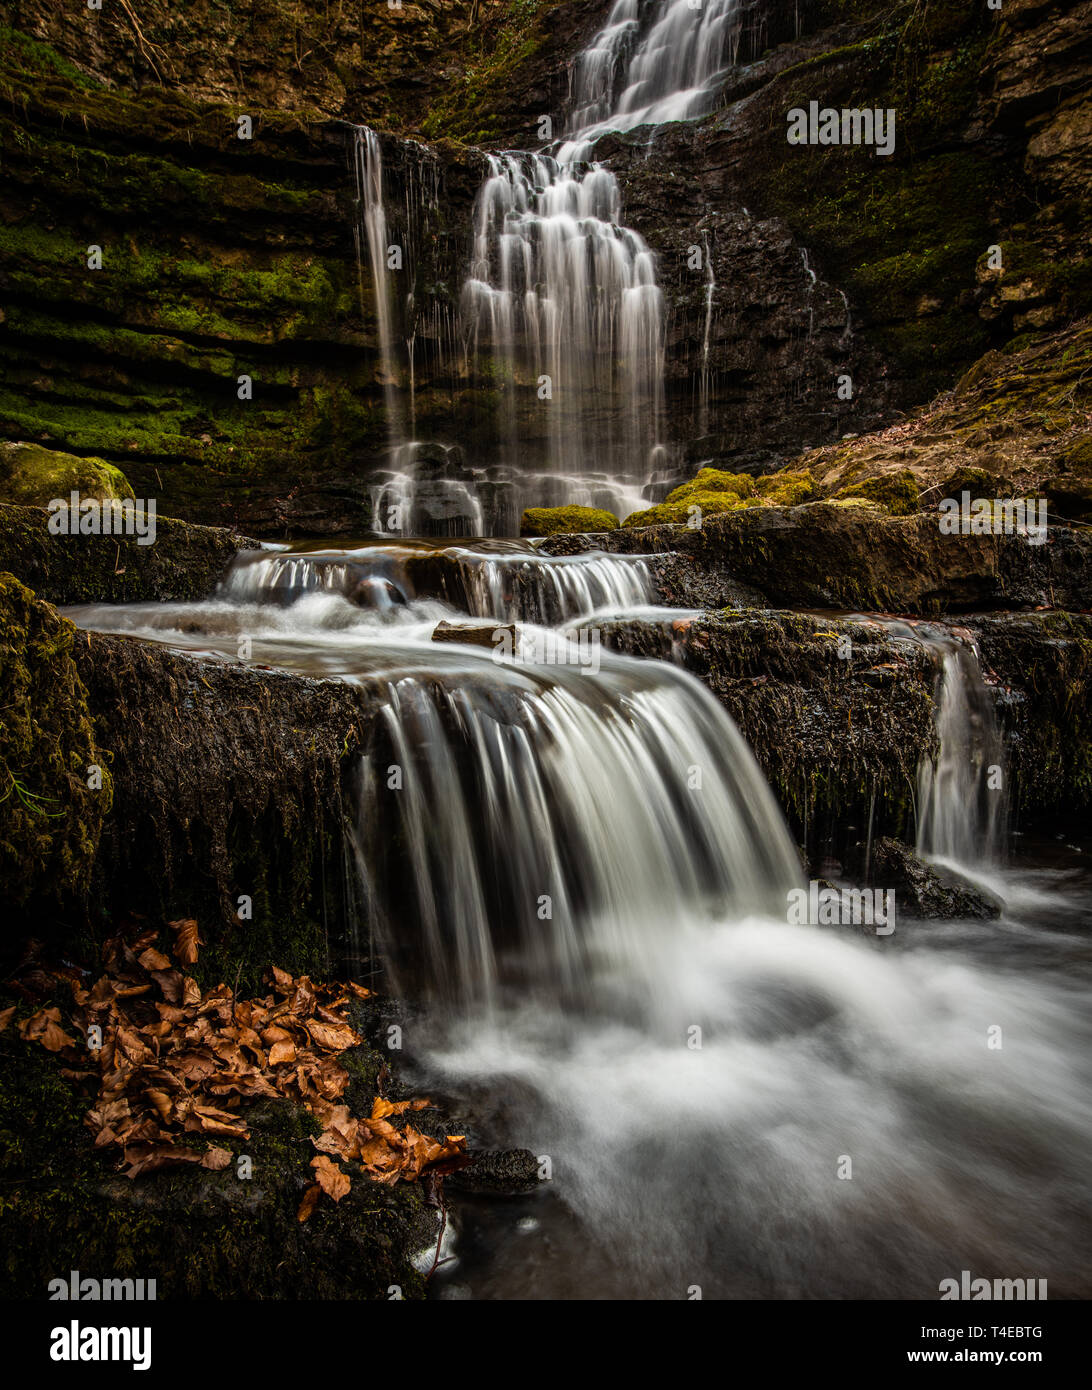 Scaleber Falls lie in a deep  wooded gorge near the market town of Settle in the Yorkshire Dales. The falls are 40 foot high and cascade over limeston Stock Photo